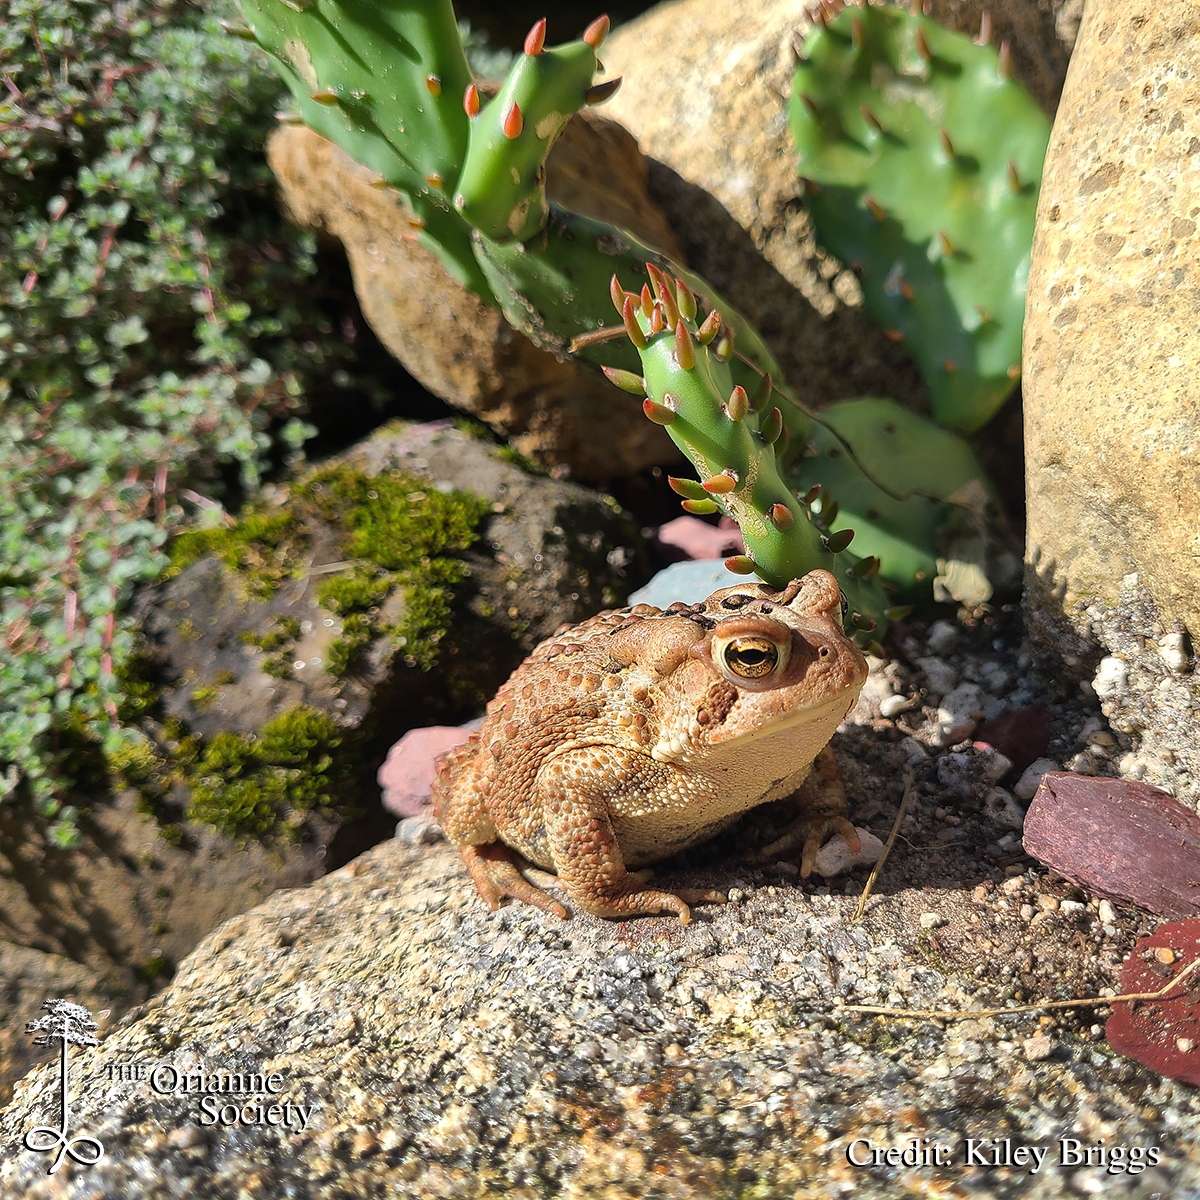 Most mornings, Kiley is greeted by this American Toad on his way out the door. It is common to have a toad live by a front door. Many insects attracted to porch lights fall to the ground, which attracts the toads. 

#OrianneSociety #KileyBriggs #amphibian #toad #americantoad